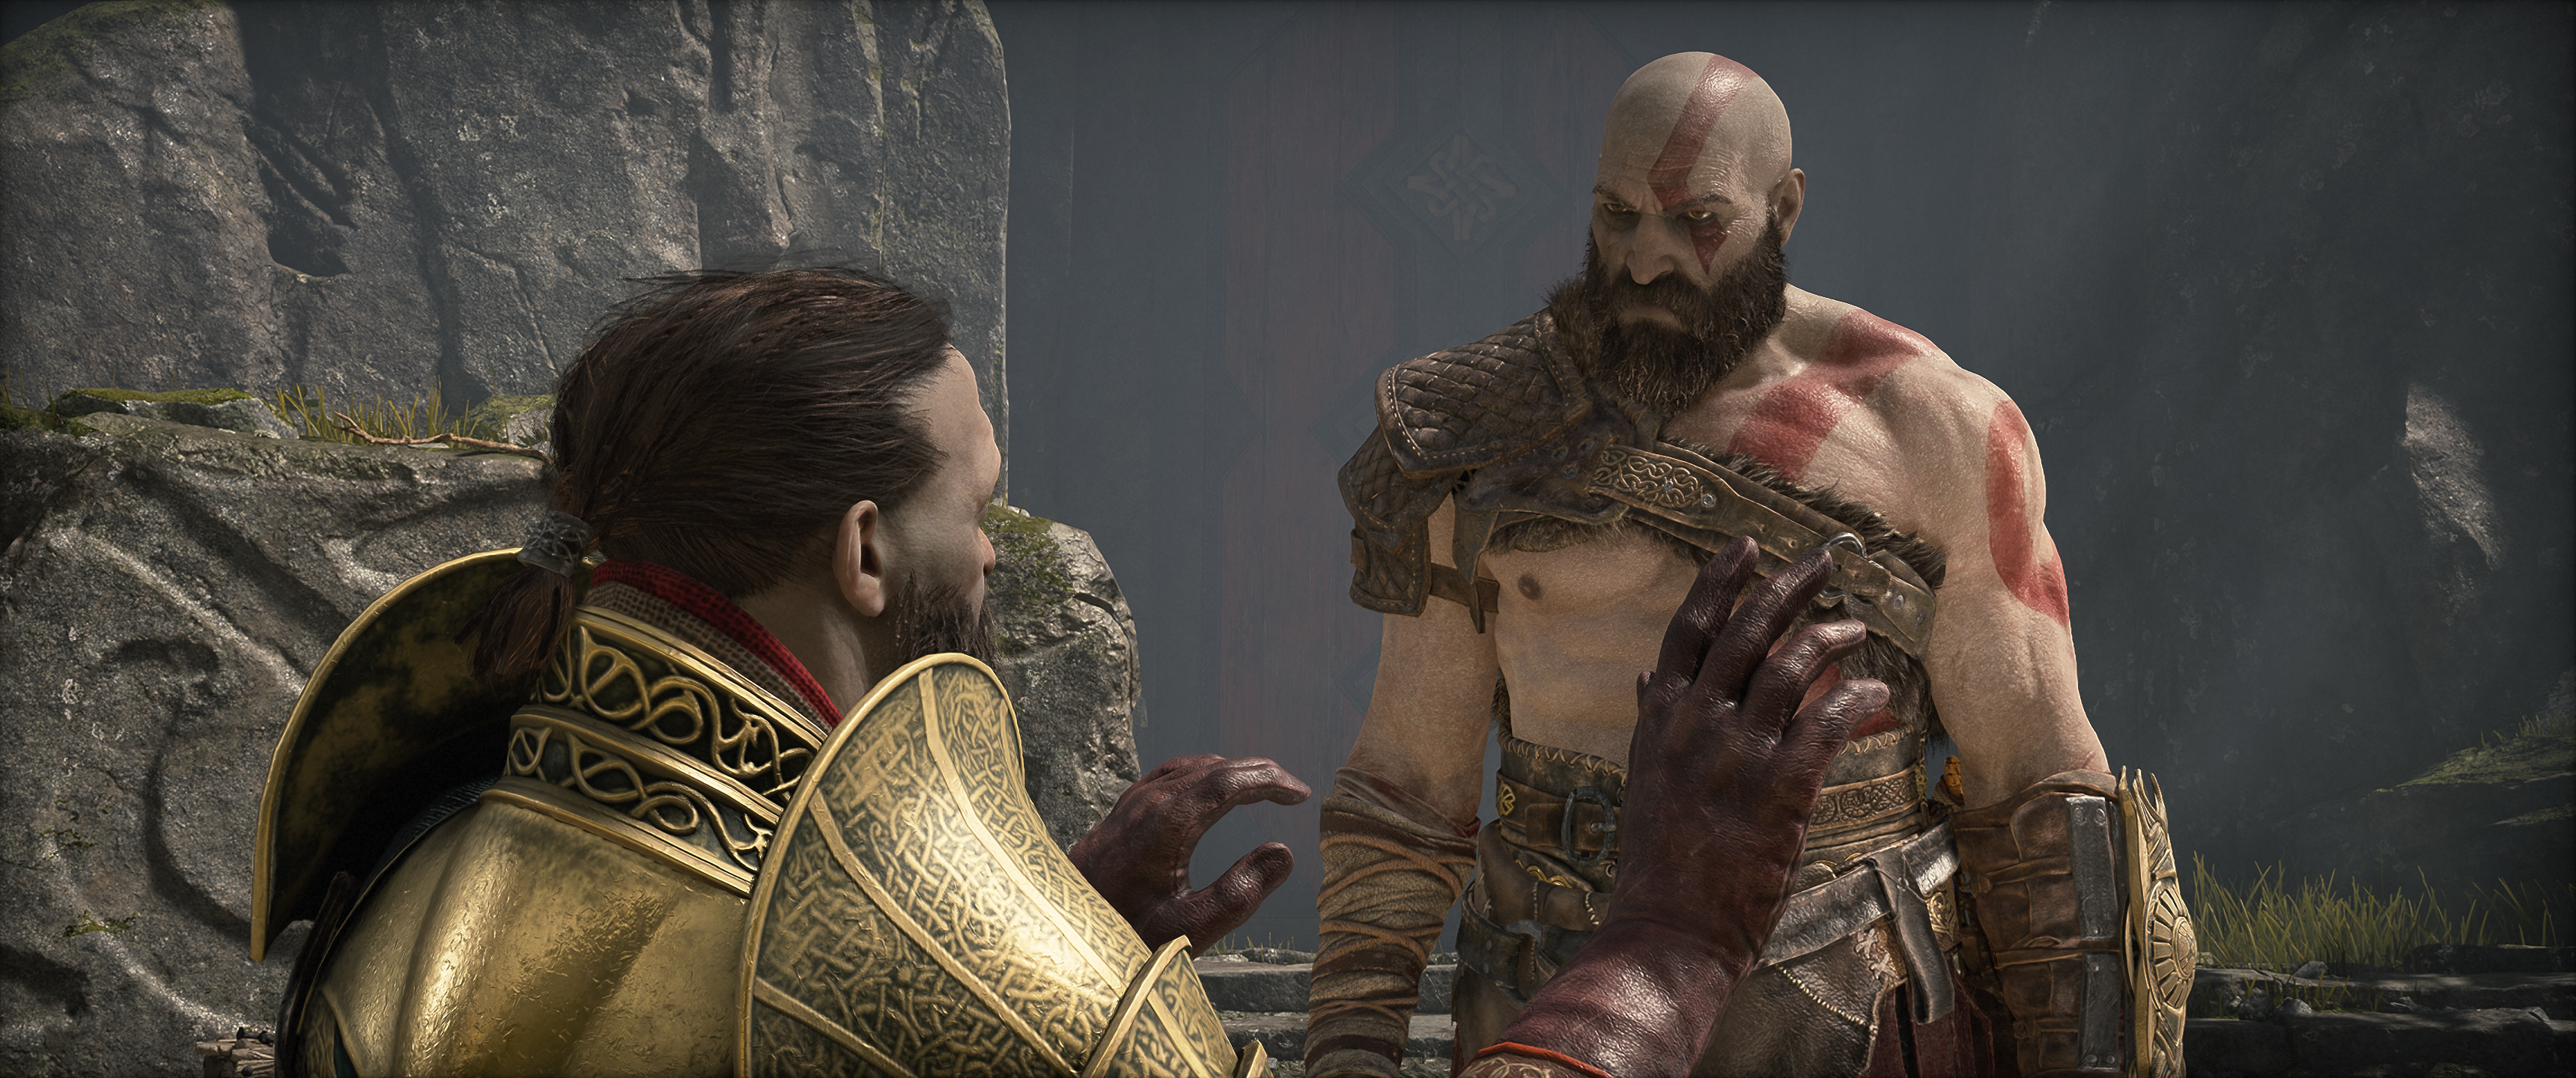 Kratos towers over Sindri in God of War, as viewed in ultrawide resolution.